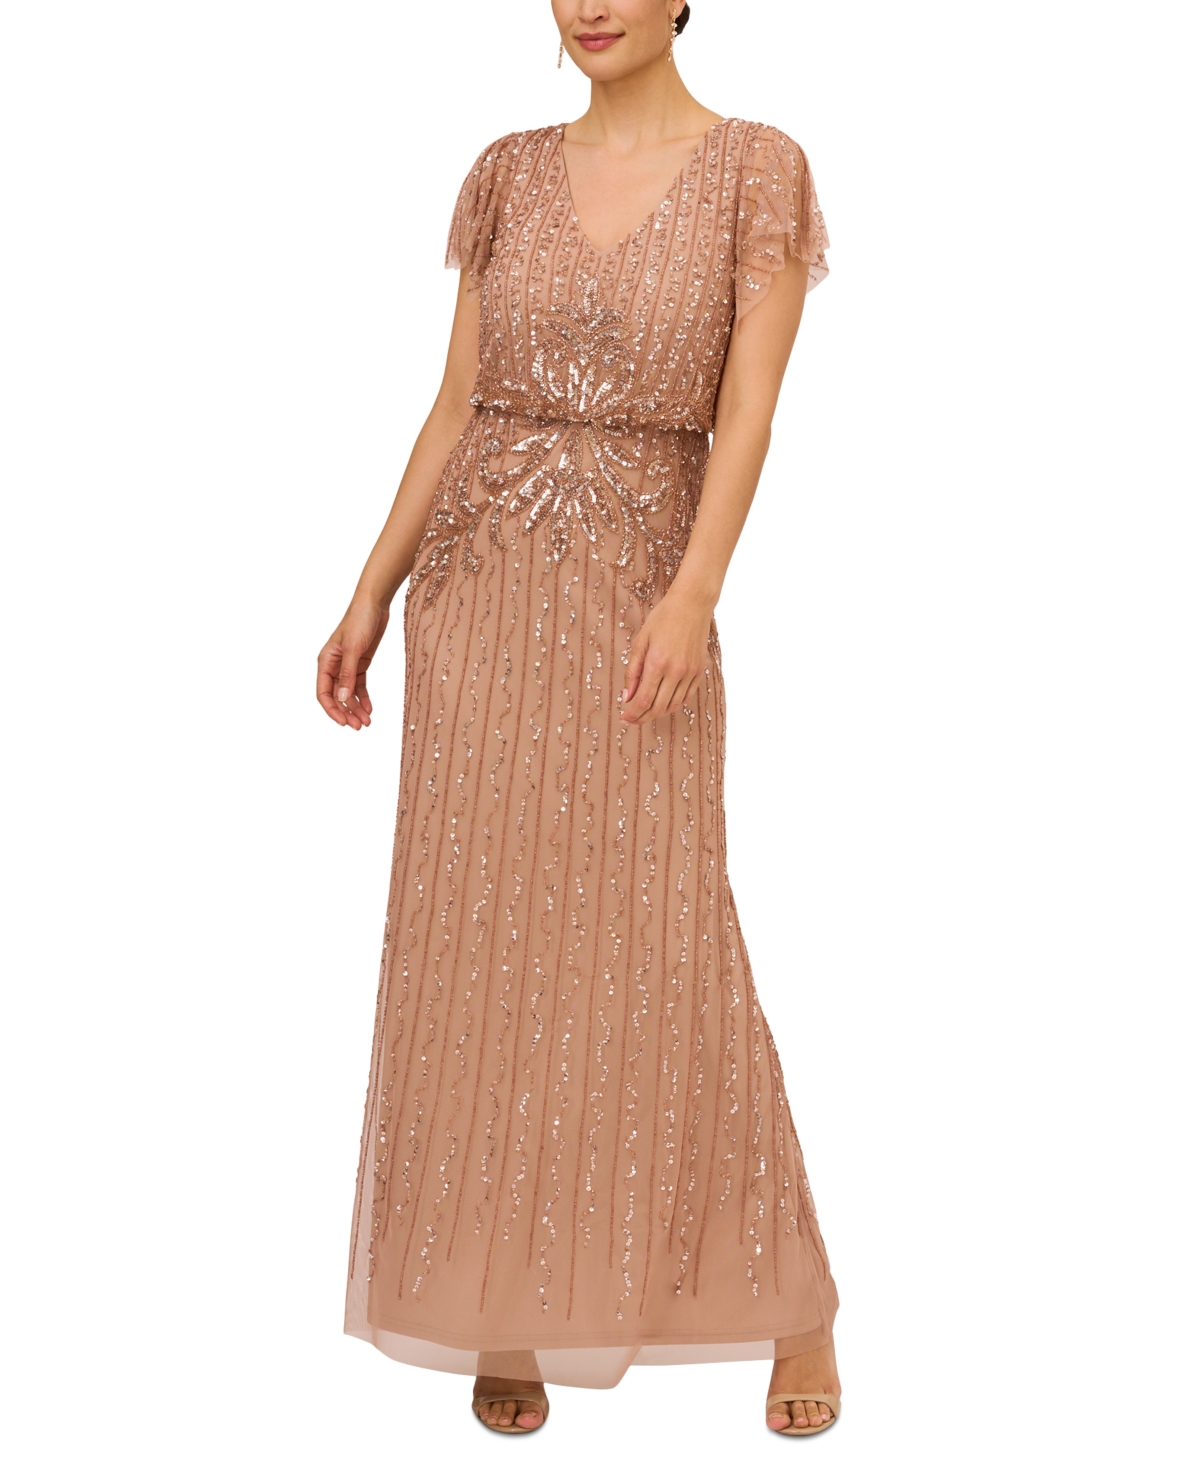 Best 1920s Prom Dresses – Great Gatsby Style Gowns Adrianna Papell Womens Beaded Flutter-Sleeve Gown - Rose Gold $249.00 AT vintagedancer.com